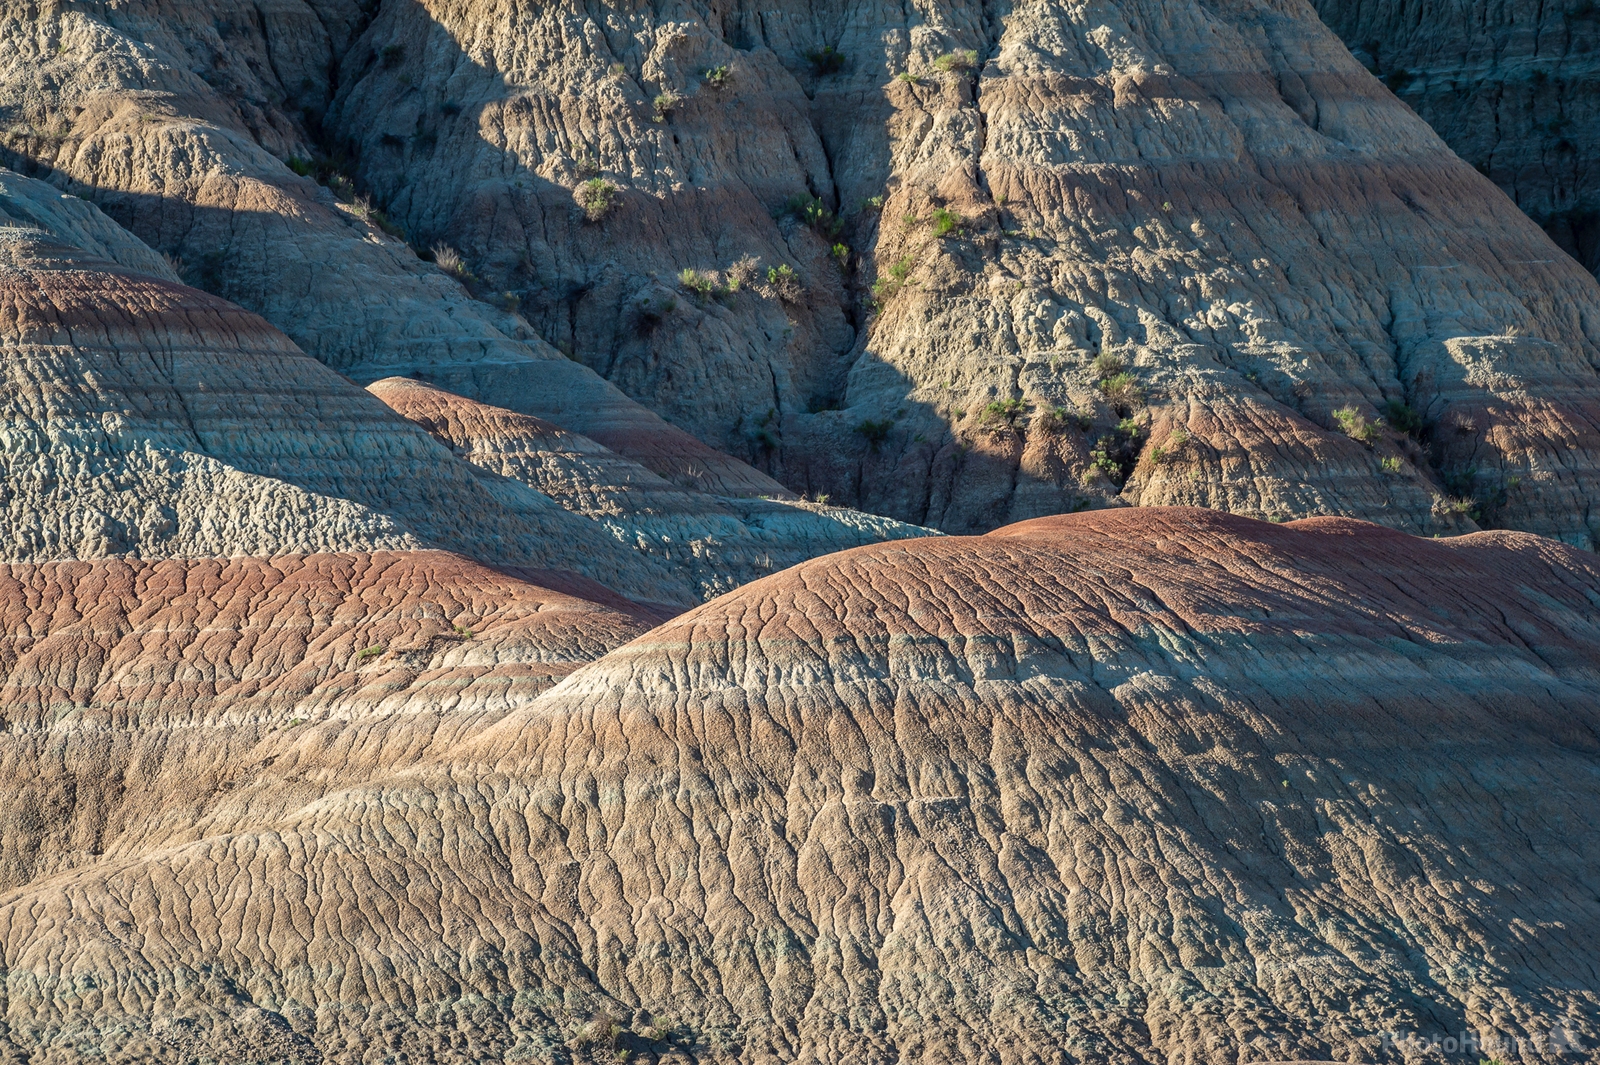 Image of Yellow Mounds Overlook, Badlands N.P. by Sue Wolfe